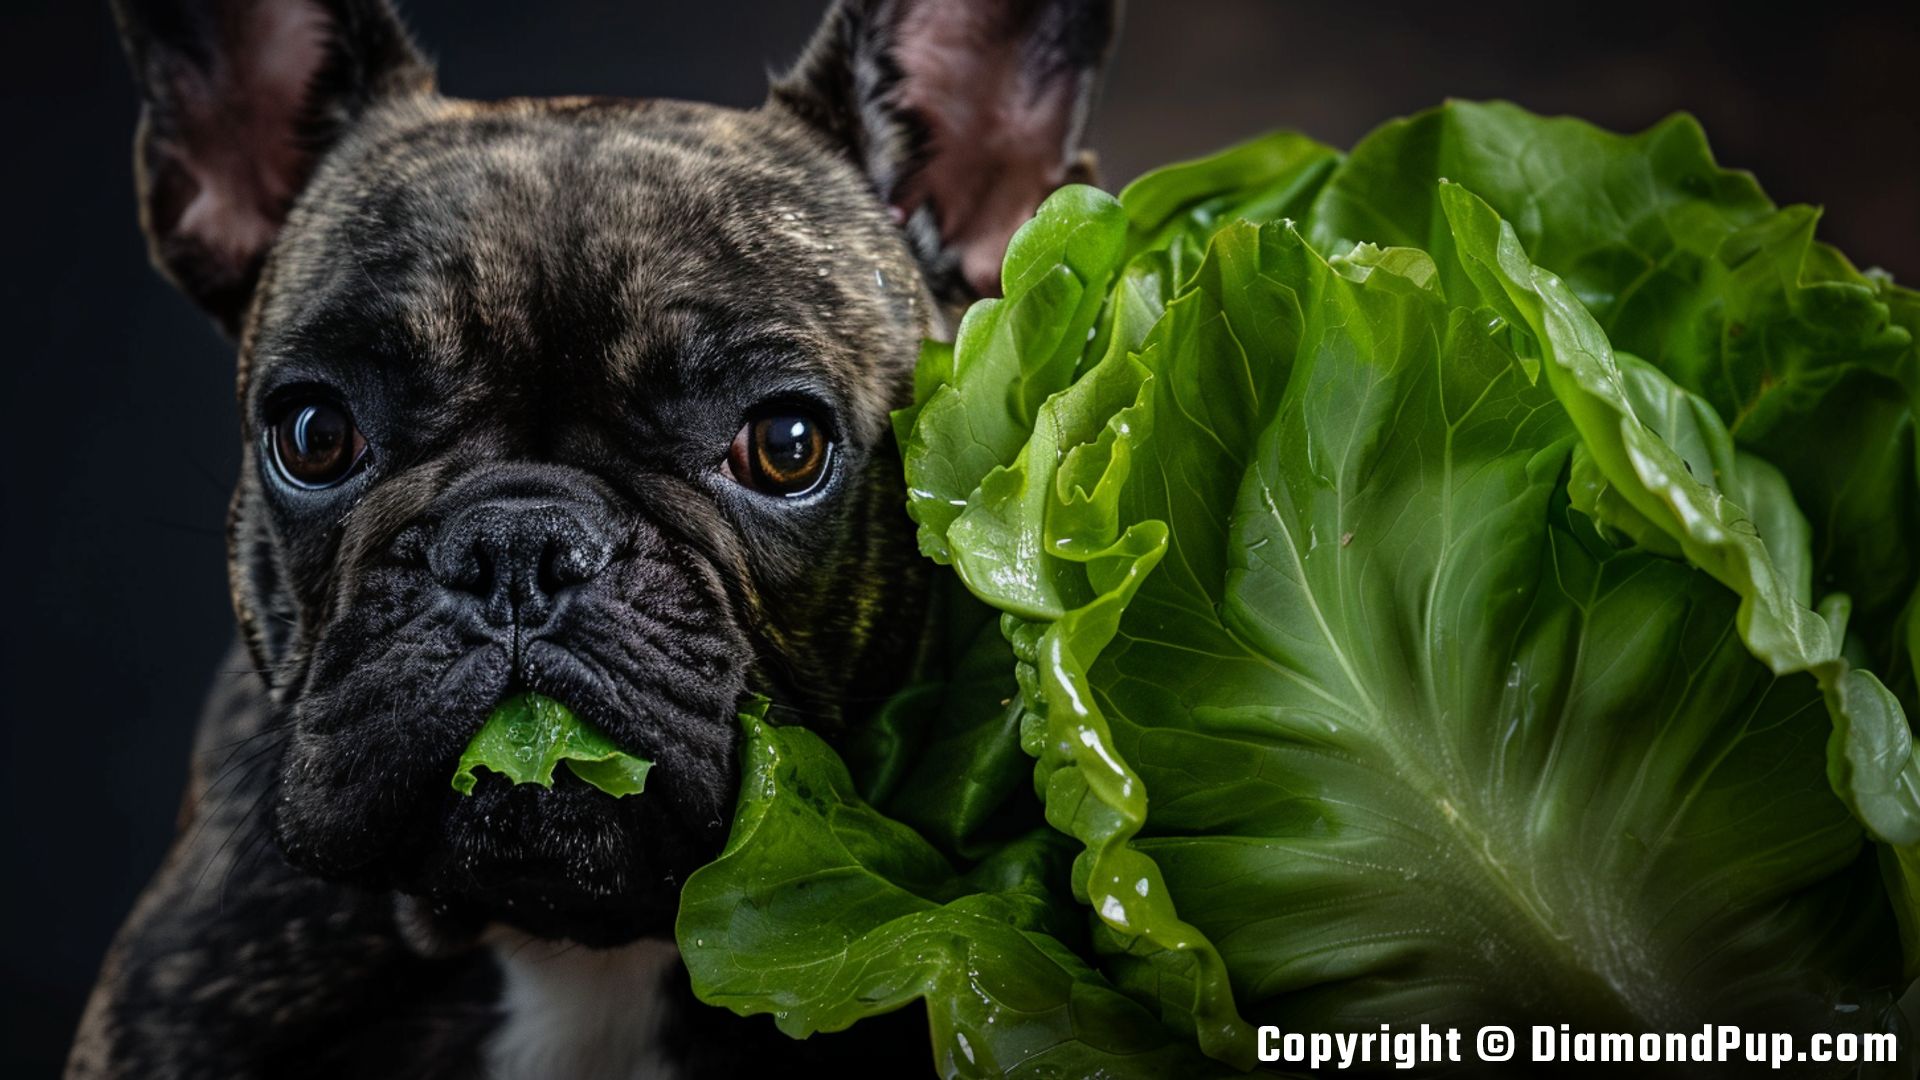 Photo of a Cute French Bulldog Snacking on Lettuce